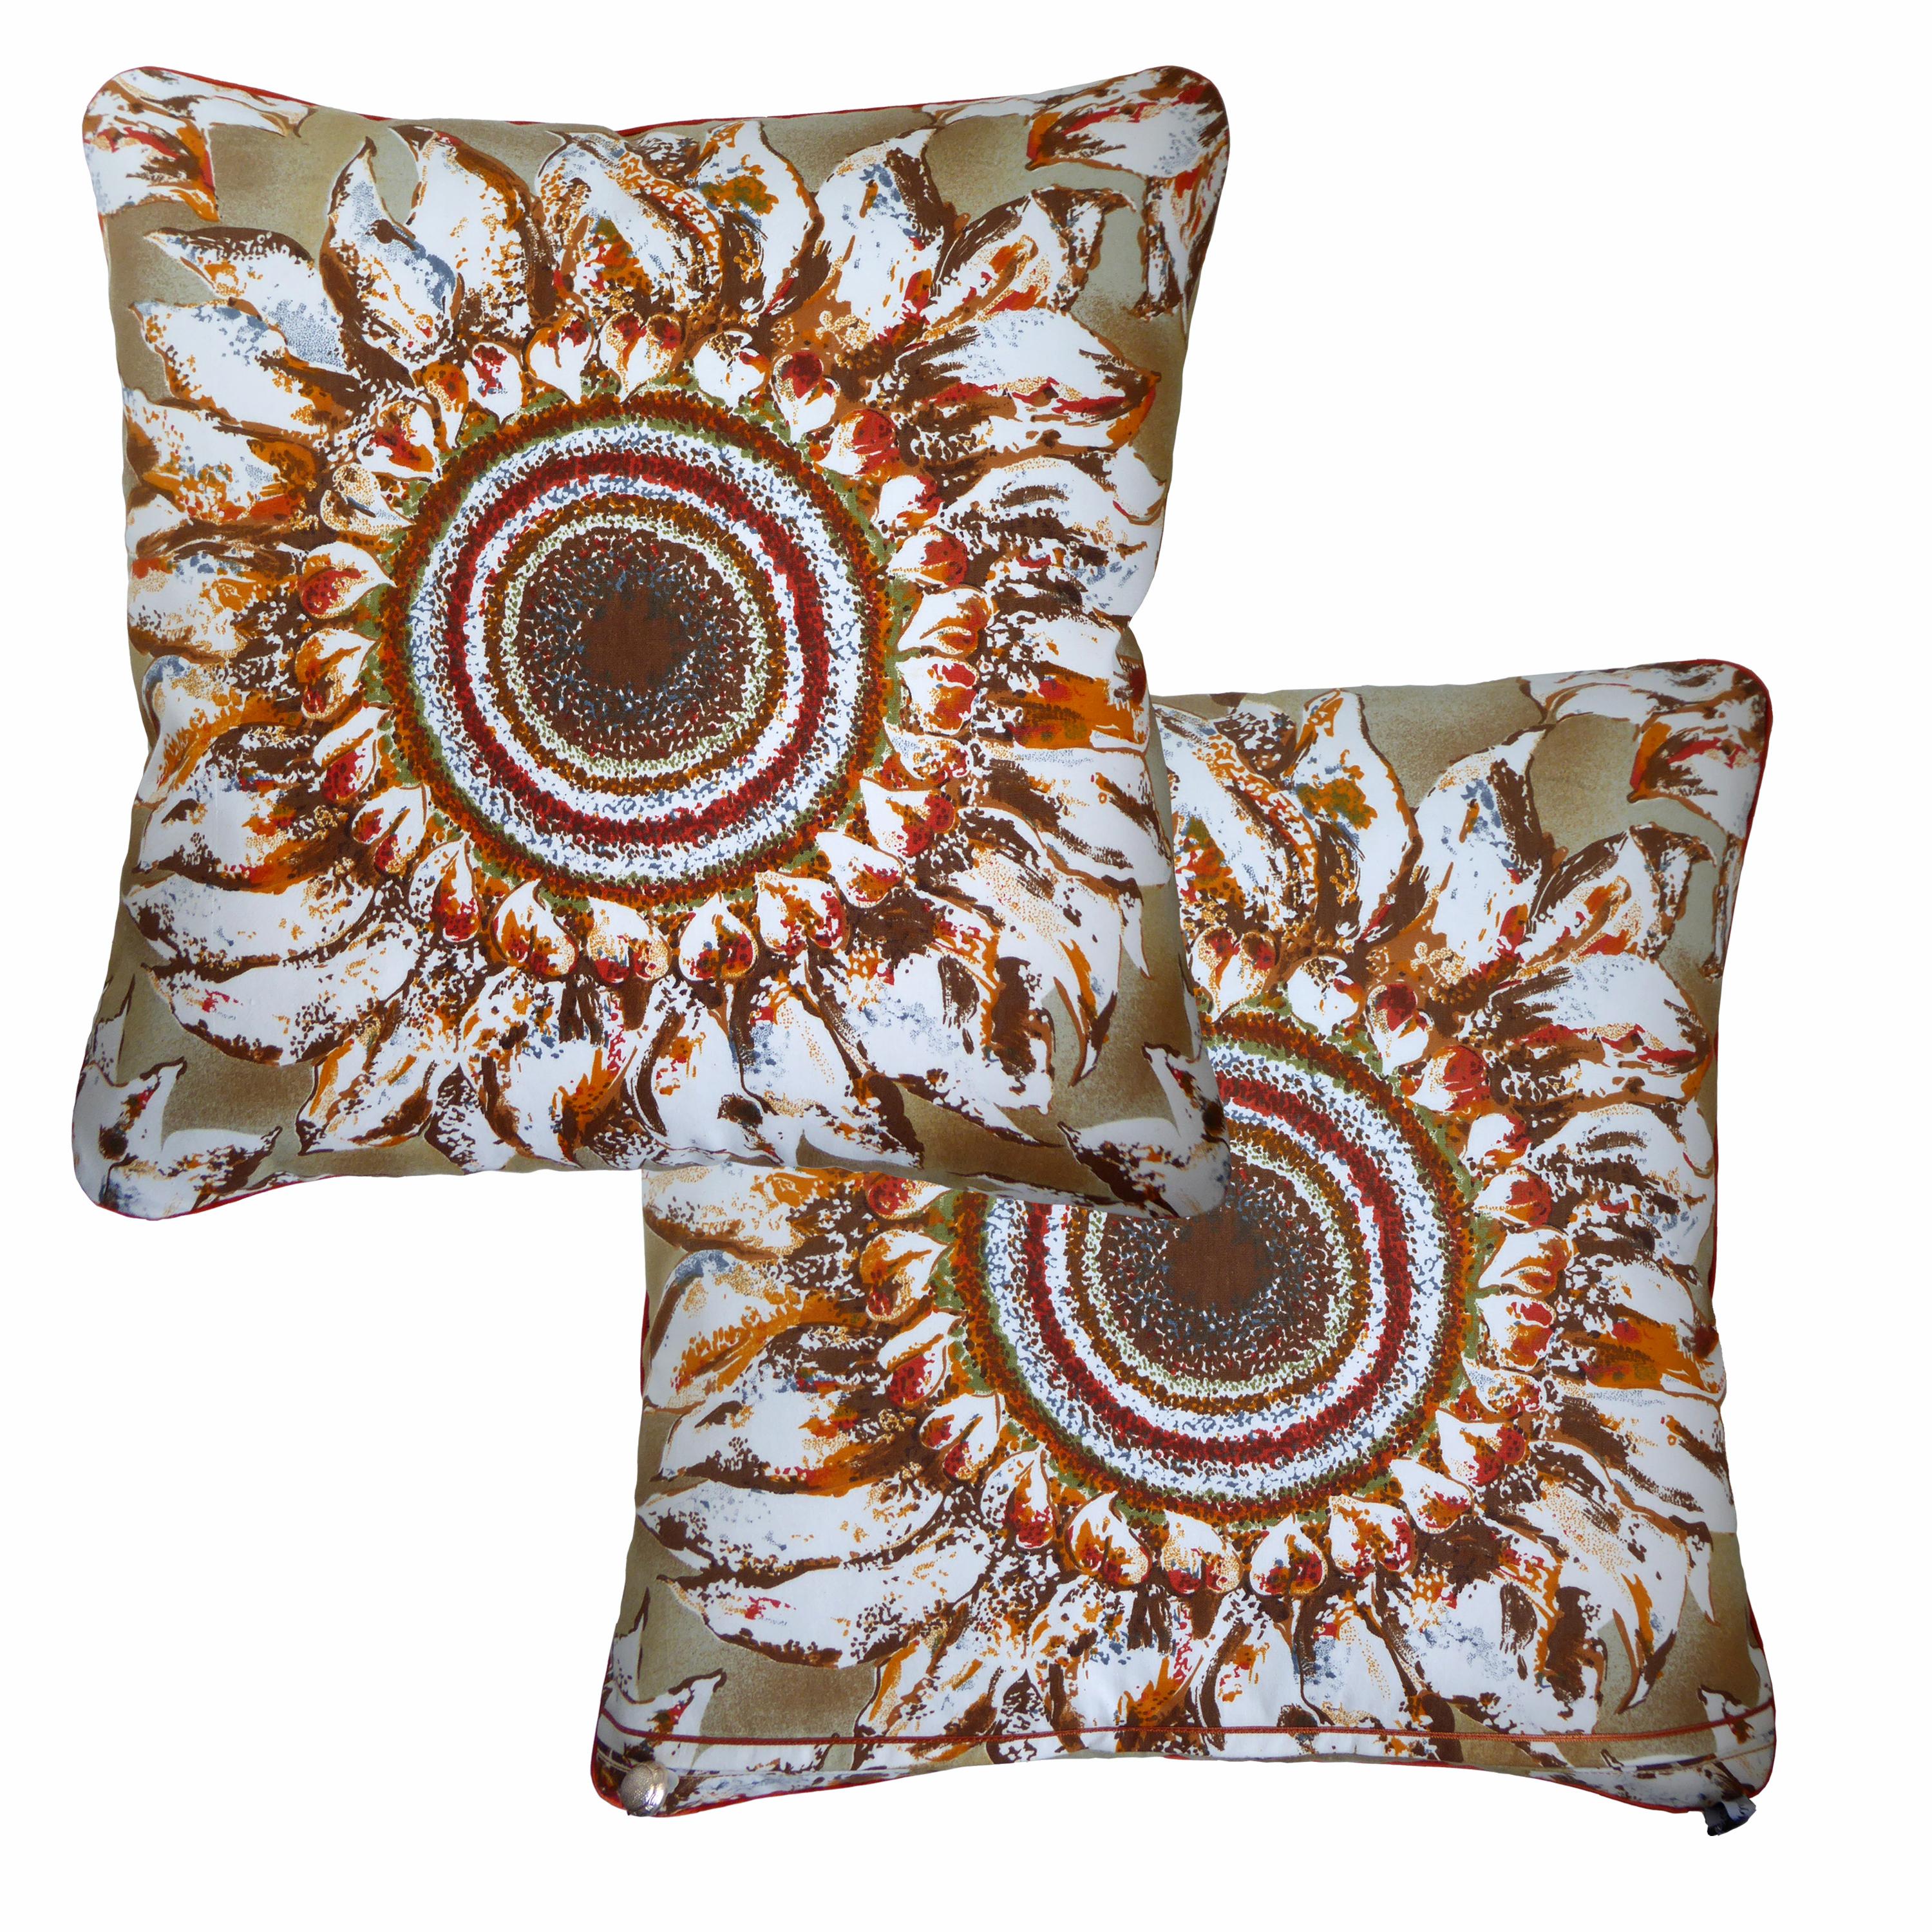 'Ferrara Sunflowers',
circa 1970
British made luxury cushion created by using original vintage furnishing fabric designed and manufactured by A Hardy and named as ‘Ferrara’ on the selvedge
Provenance; Britain
Made by Nichollette